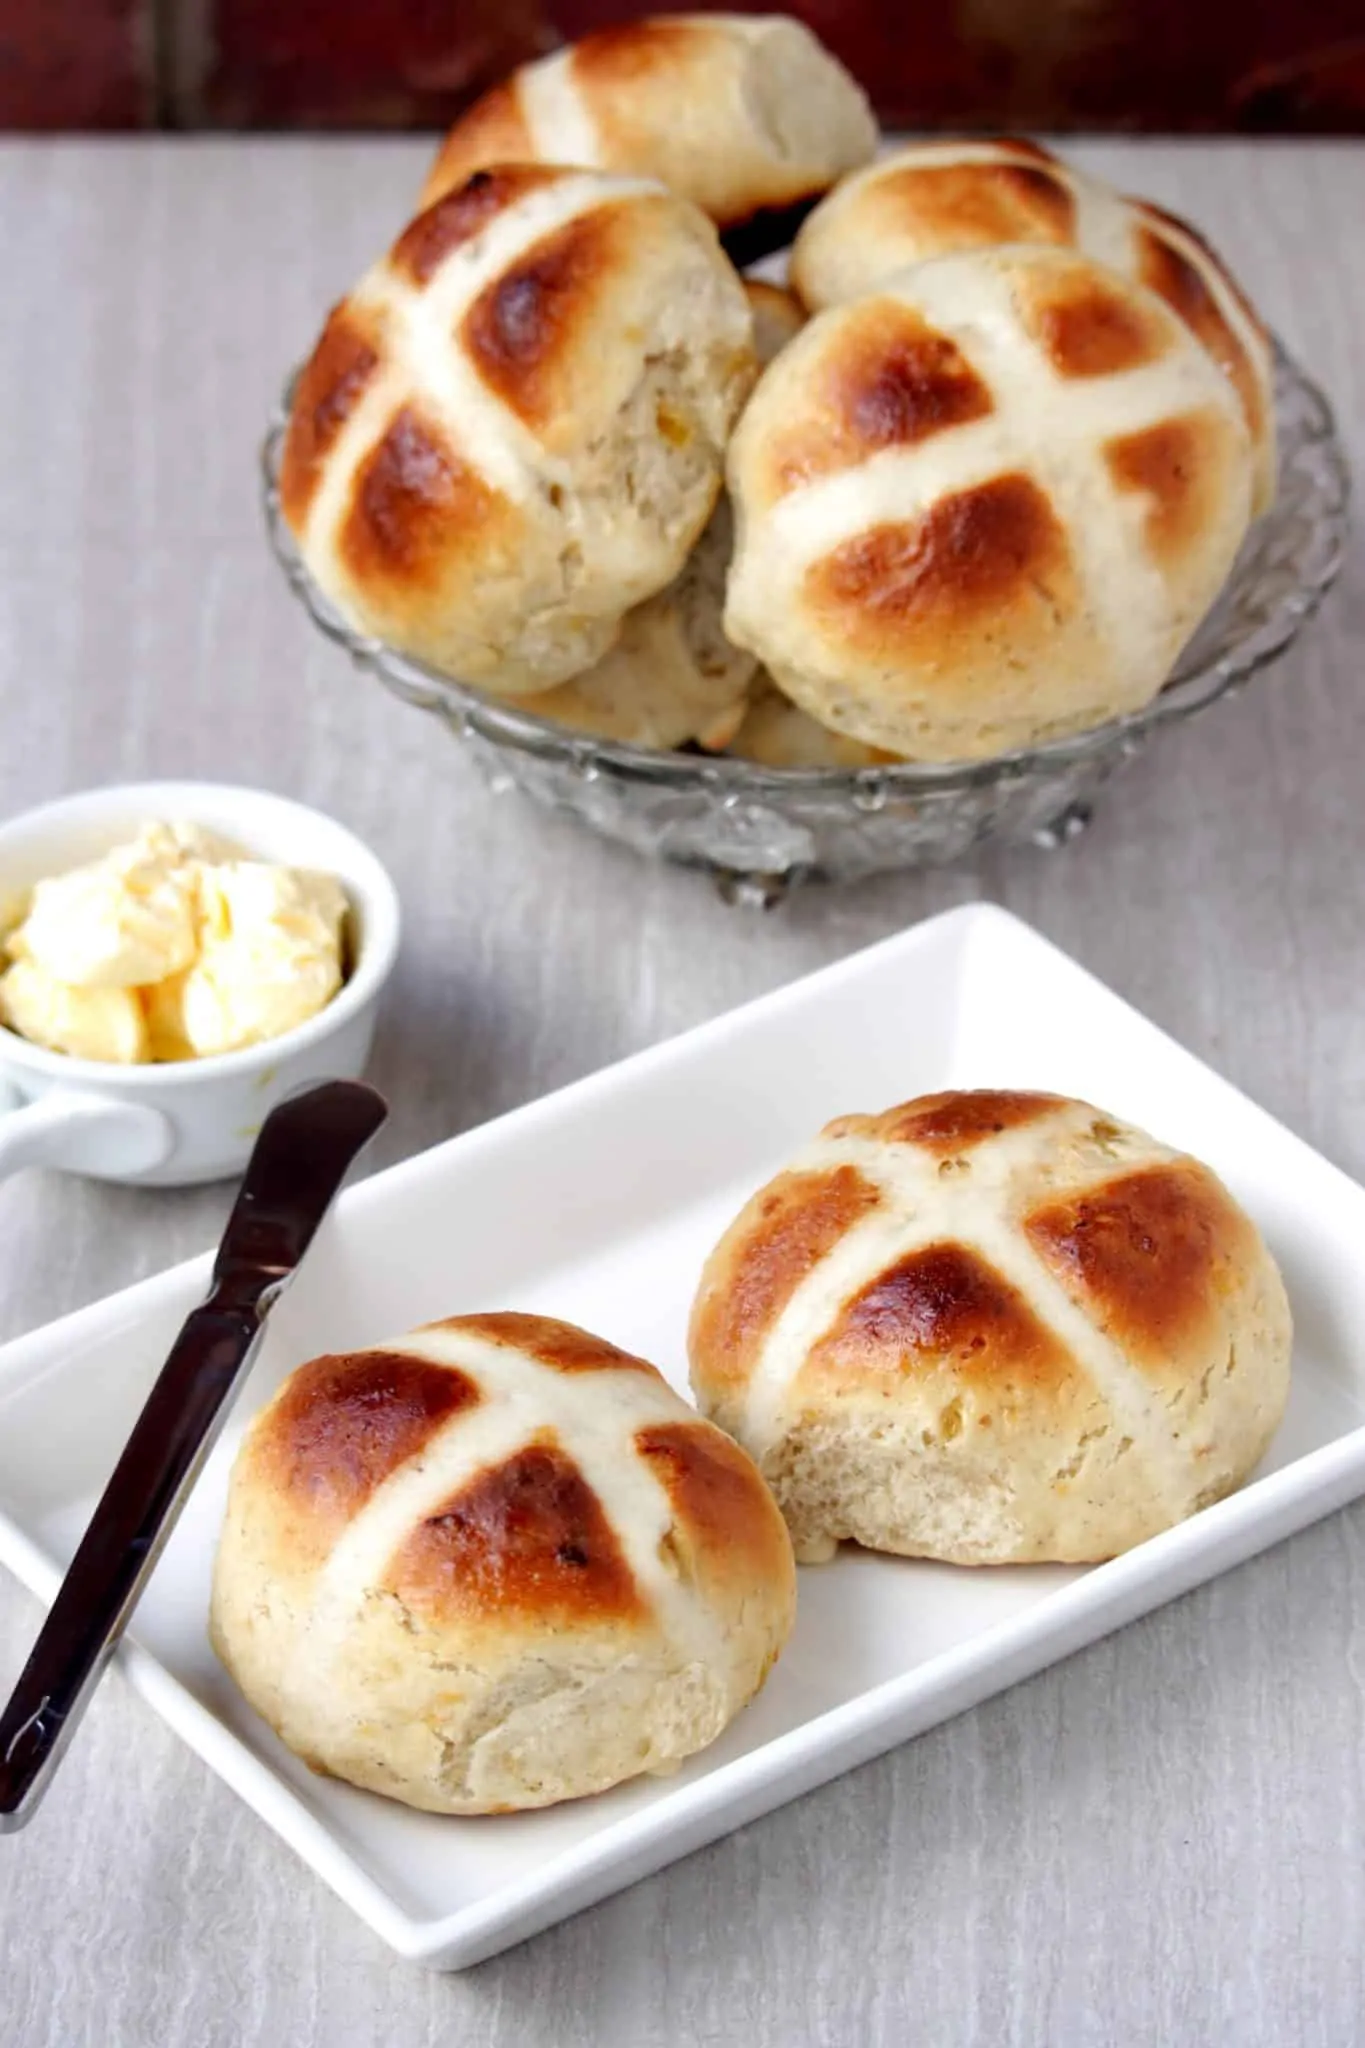 Hot Cross Buns in a white plate and stacked in a glass bowl with butter on the side.